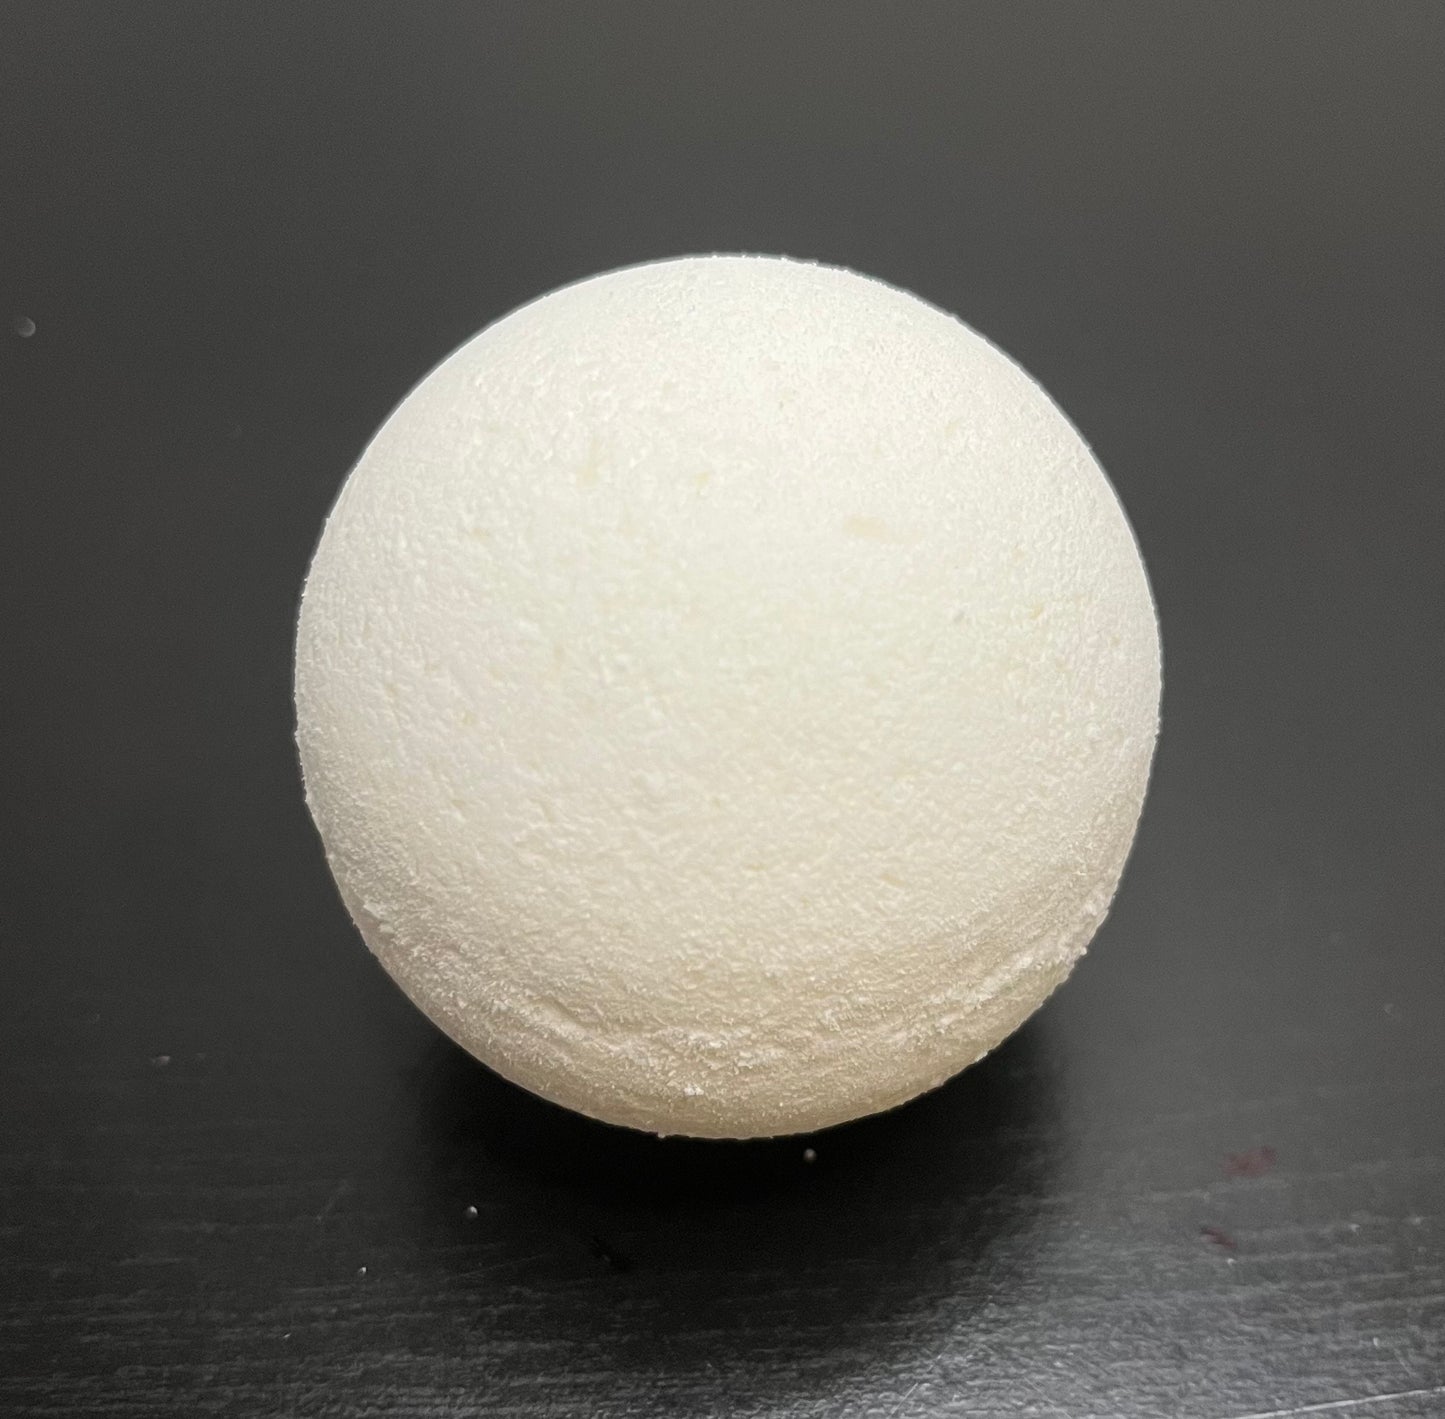 Unscented Bath Bombs